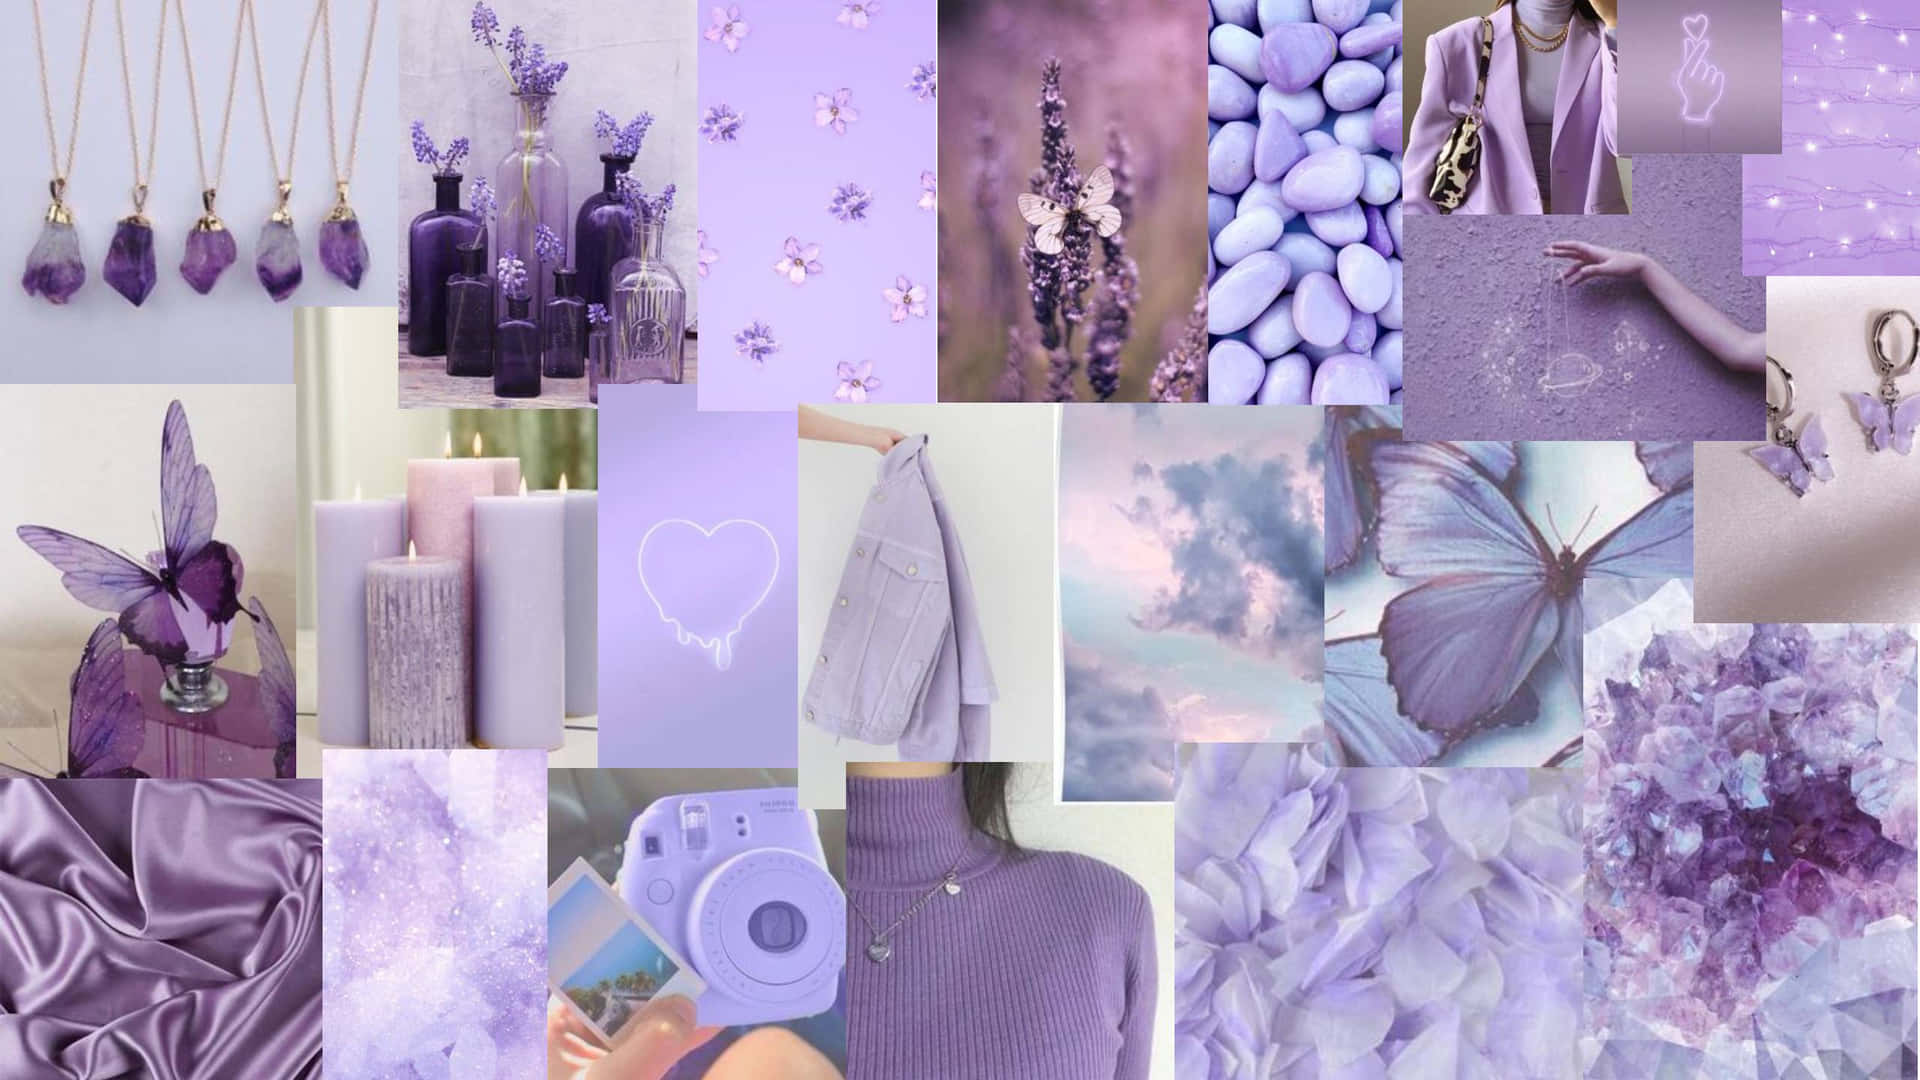 Get Creative In Your Wall Decor With This Vibrant Purple Aesthetic Collage